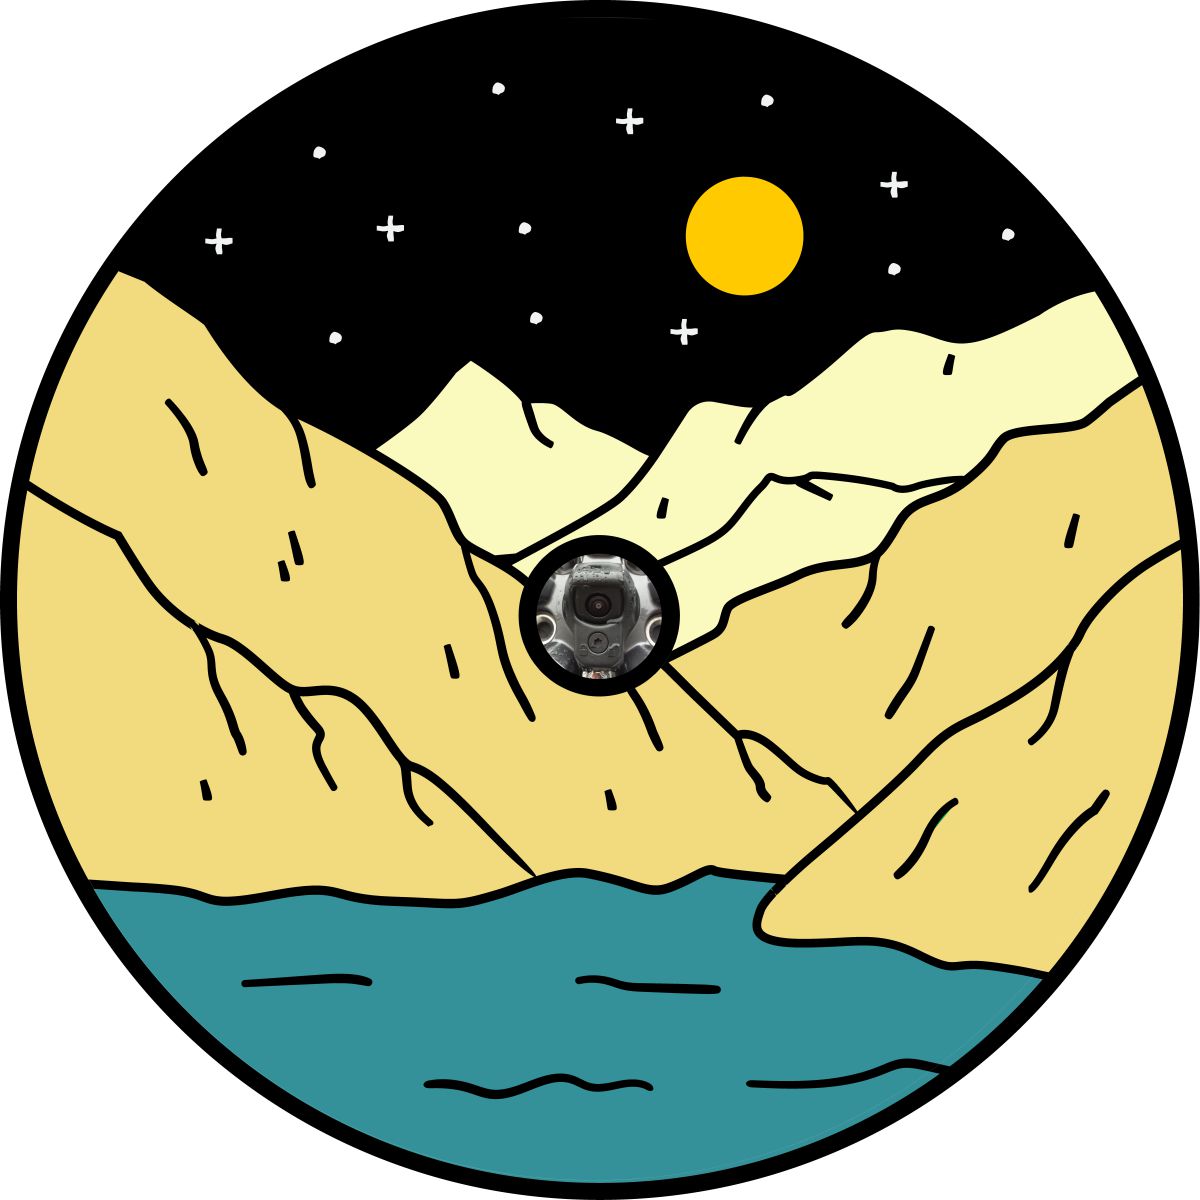 Graphic designed spare tire cover for vehicles with backup cameras. Mountains and water under the dark starry moonlit sky.